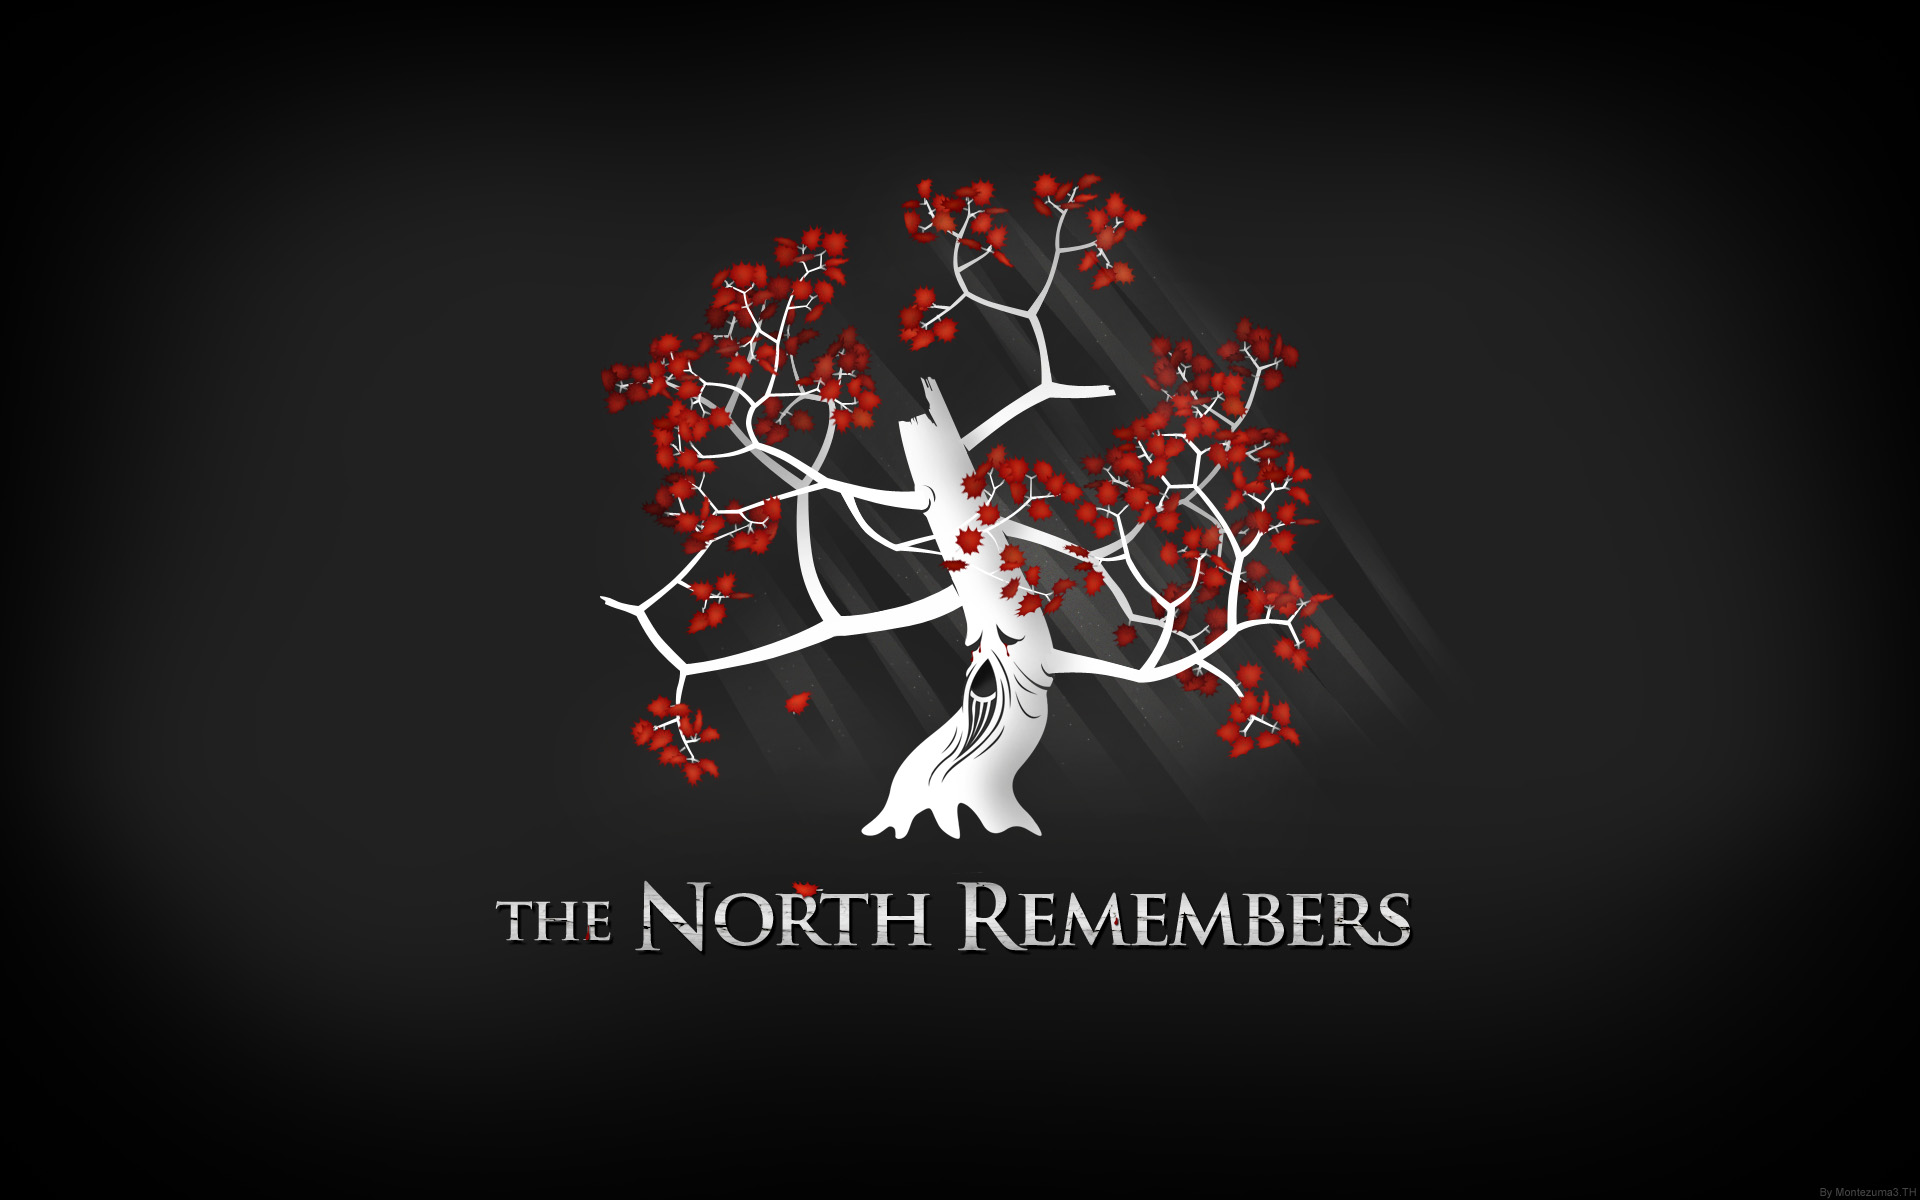 The North Remembers 氷と炎の歌 壁紙 ファンポップ